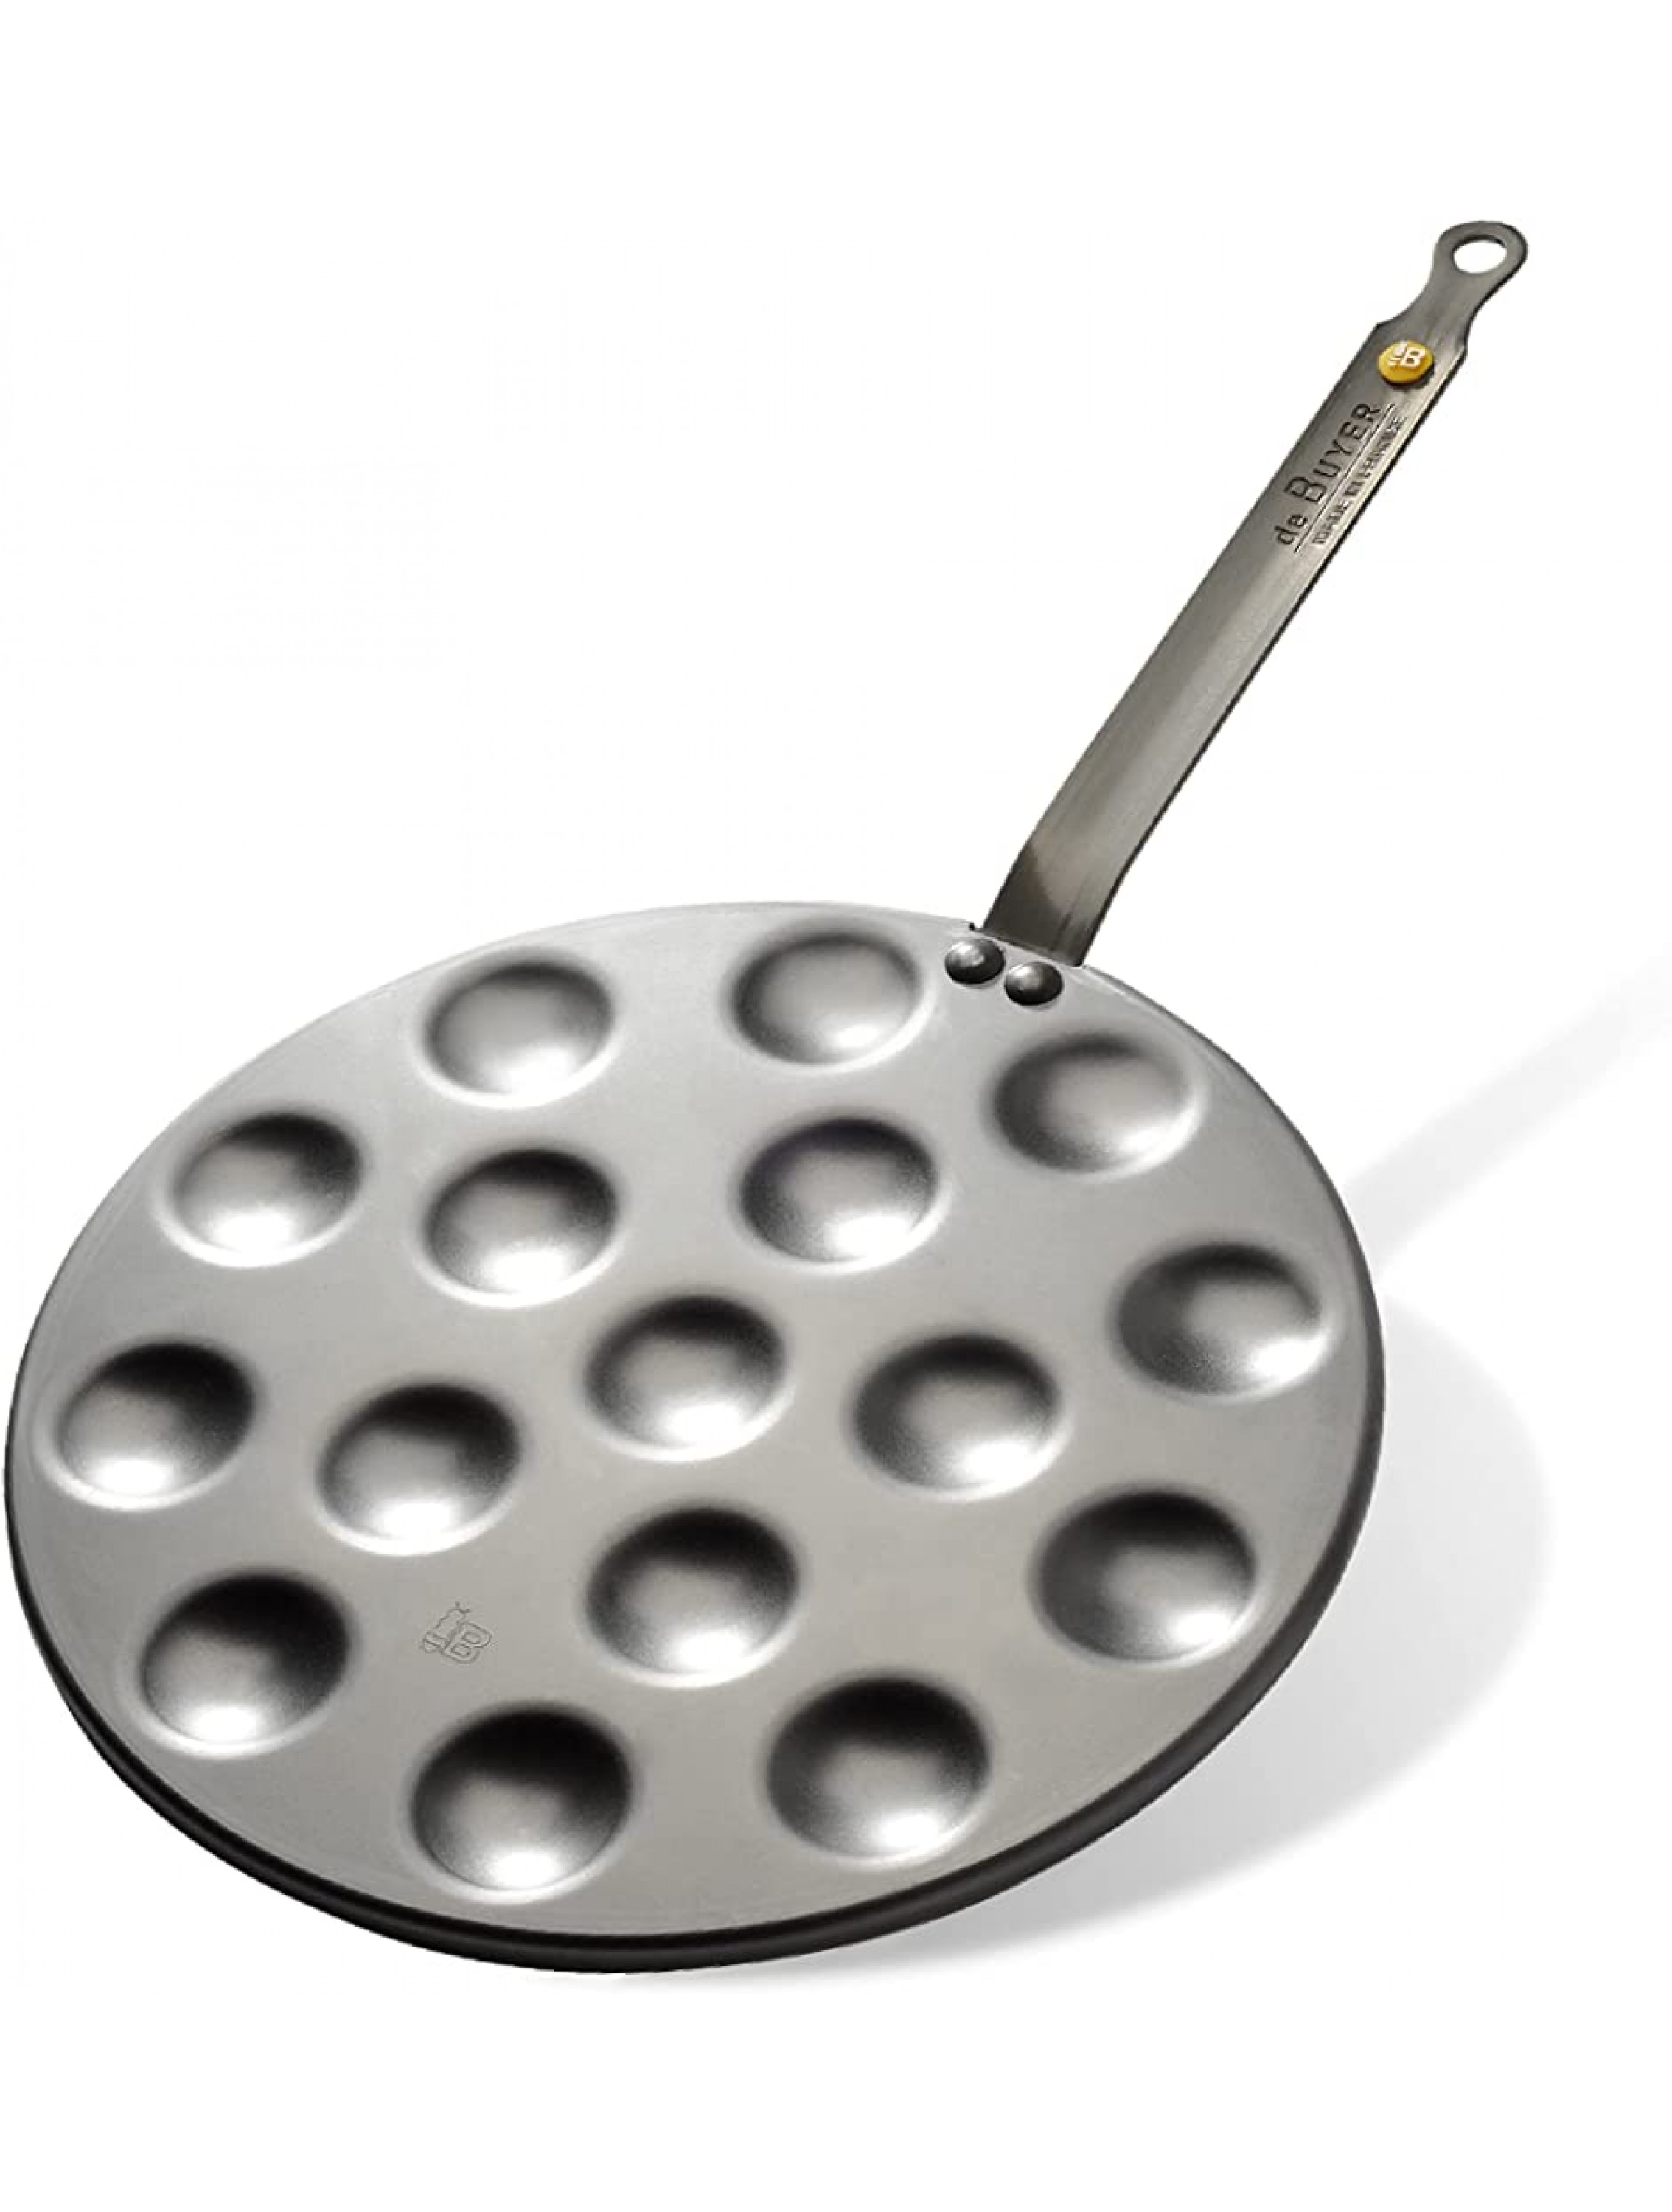 de Buyer Mineral B Aebleskiver & Poffertjes Pan Nonstick Specialty Frying Pan Carbon and Stainless Steel Induction-ready 10.6 with 16 Cavities of 1.6 - BCDTWOHZR